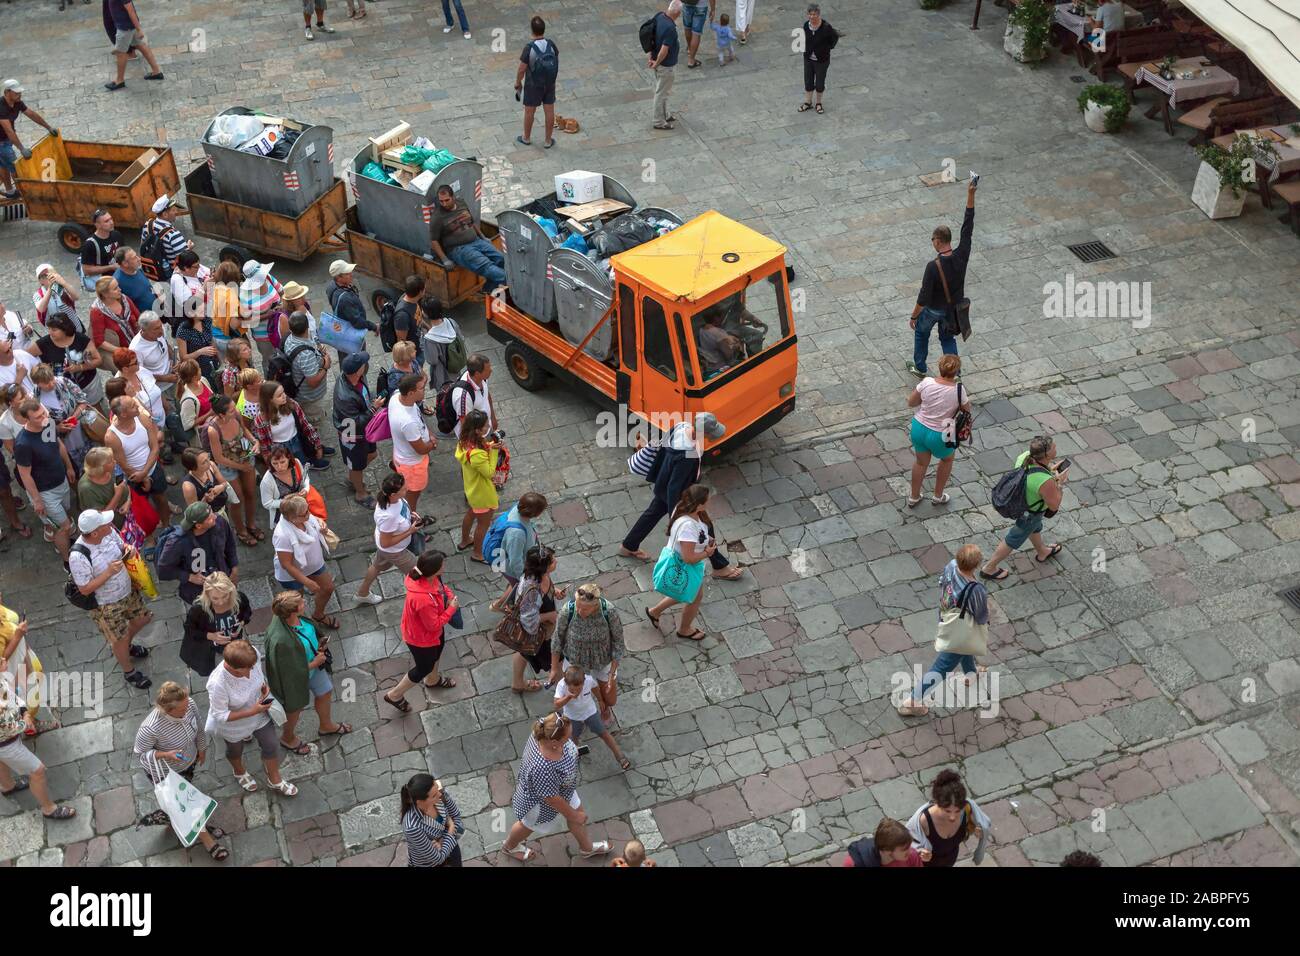 Montenegro, Sep 22, 2019: A large group of tourists follow the guide at the Saint Tryphon Plaza in Kotor Old Town Stock Photo